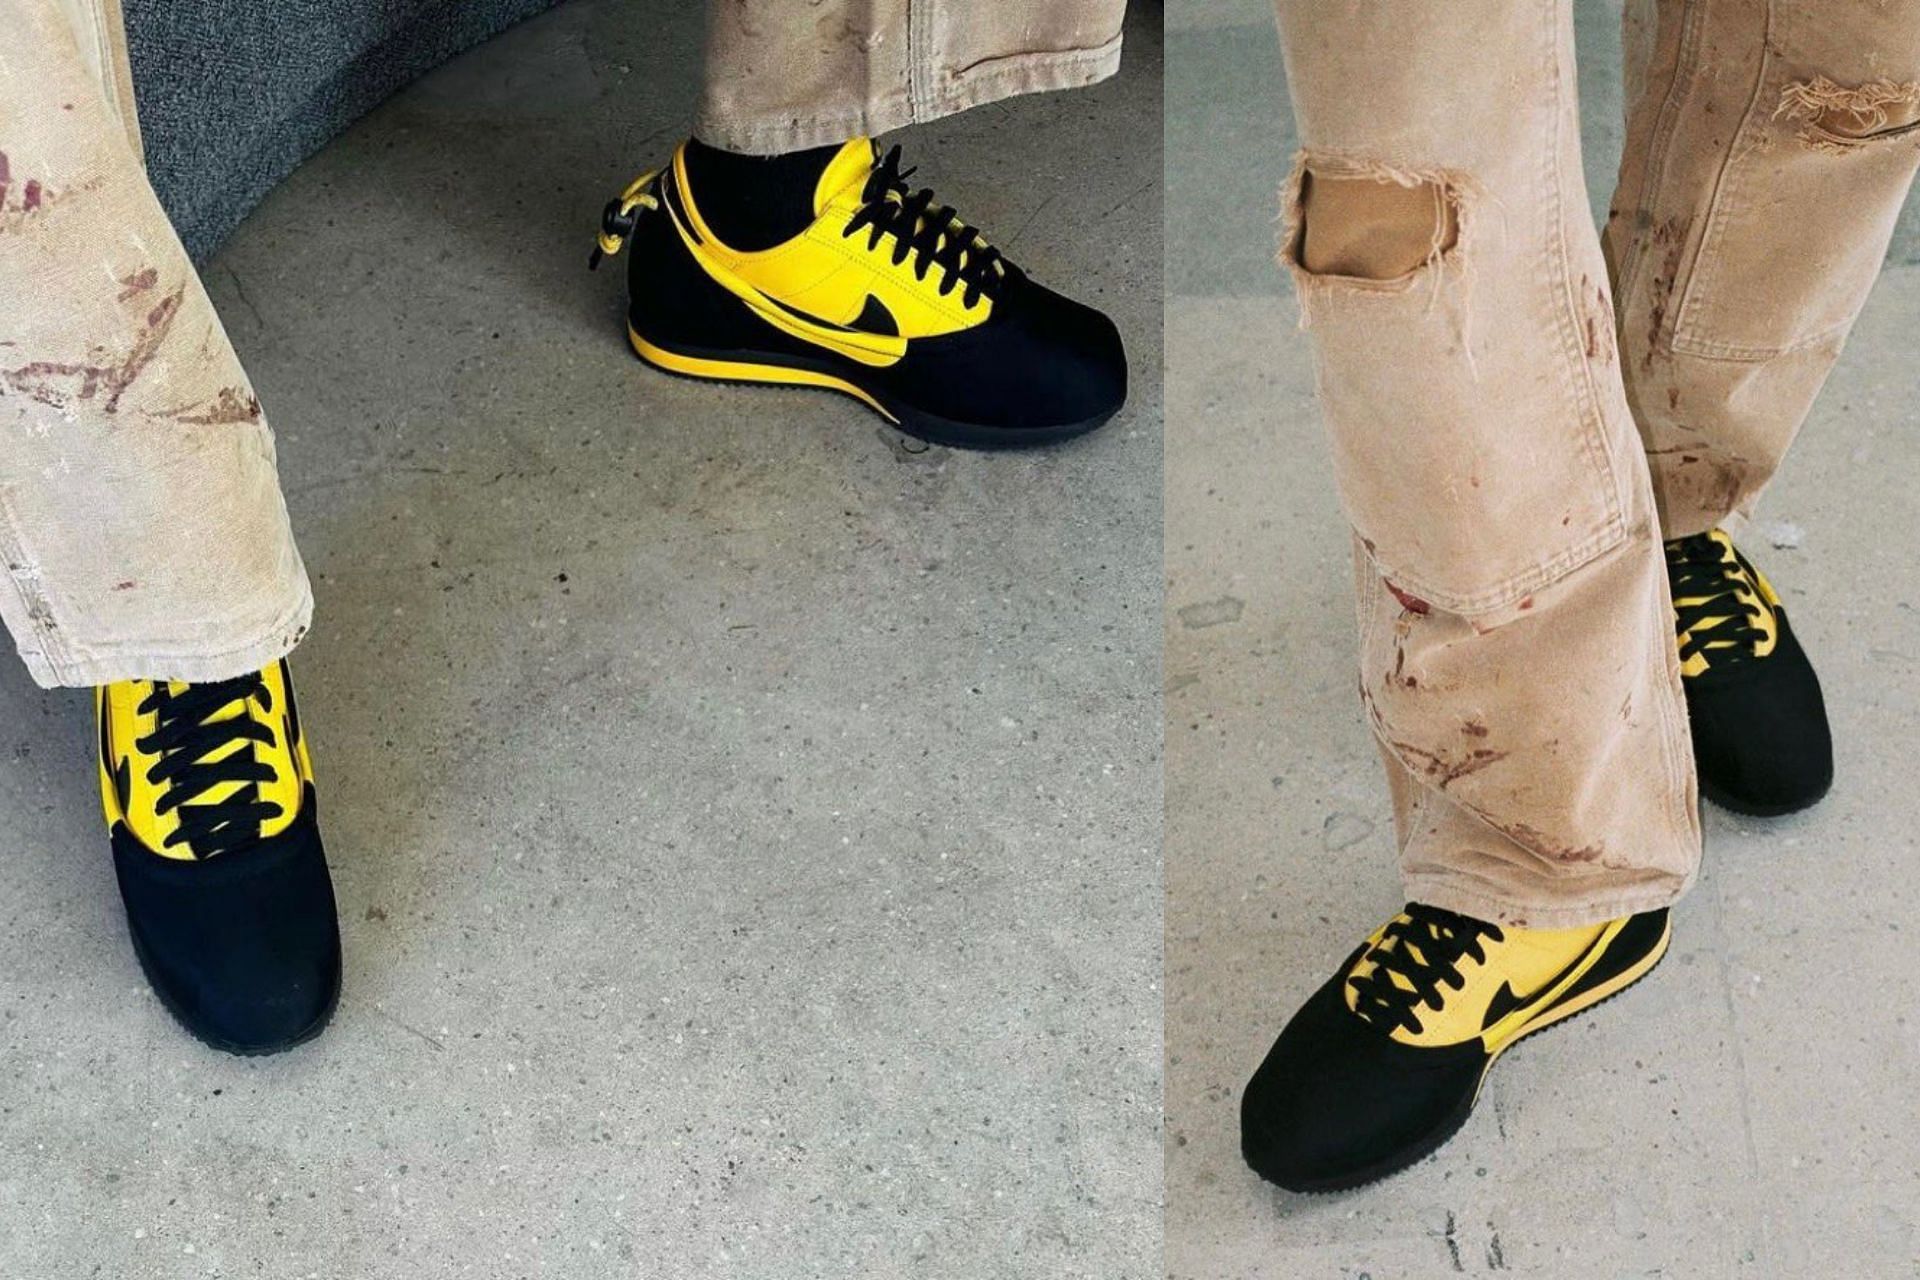 Other early images of these Clotez Black/Varsity Maize shoes (Image via Instagram/@whojungwoo)